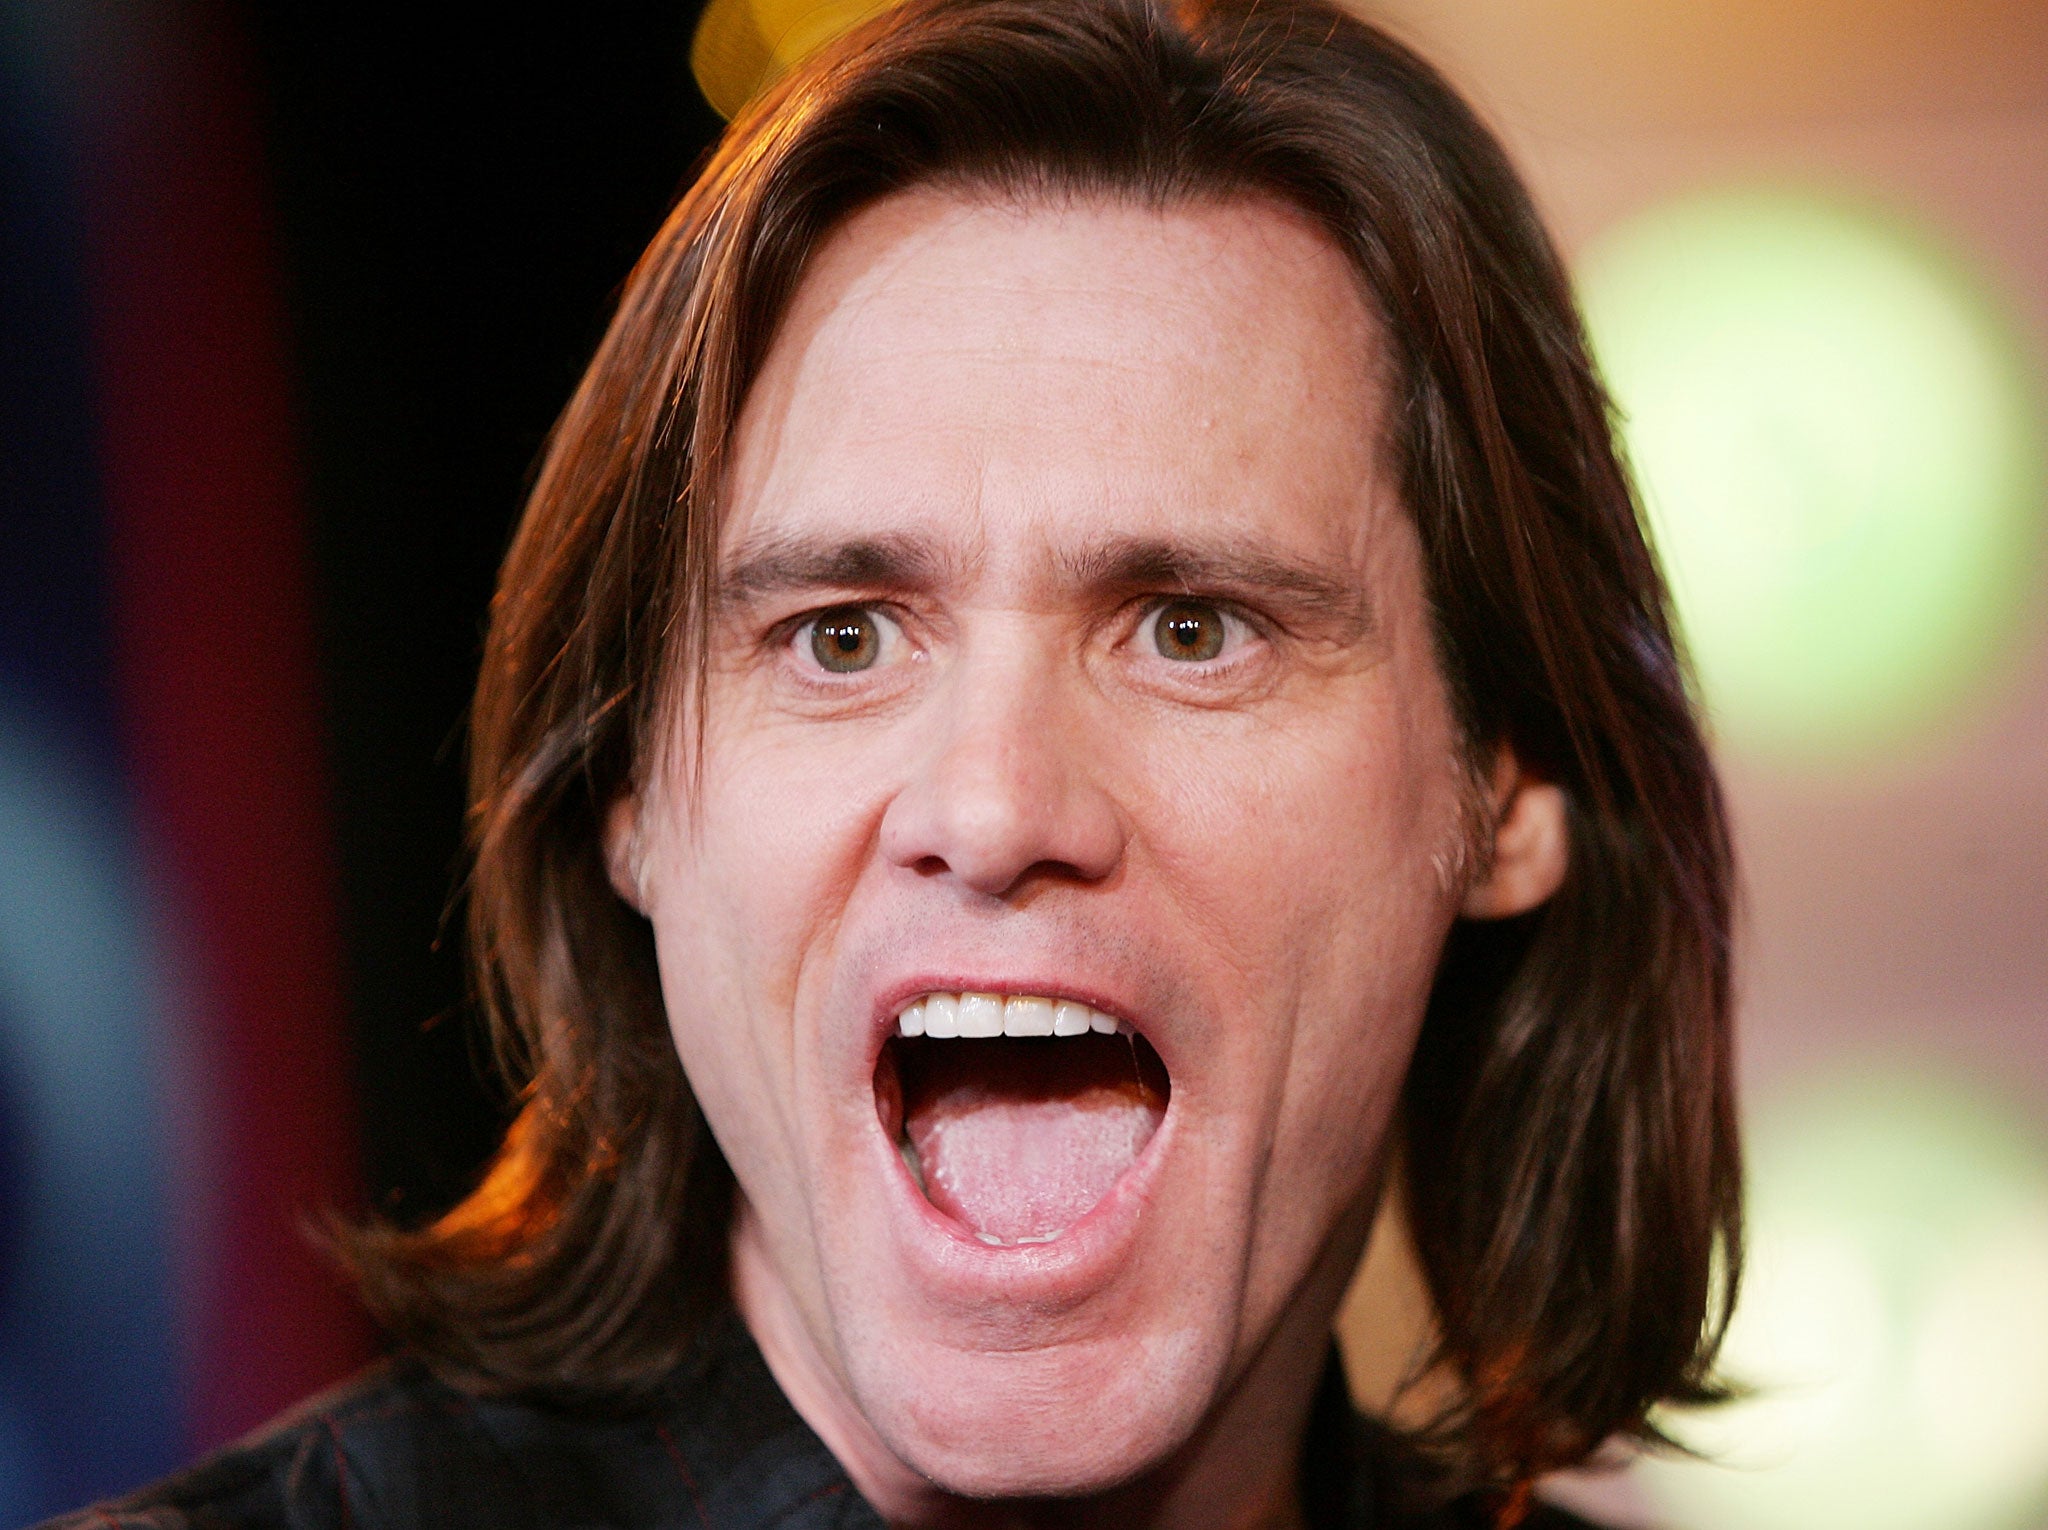 Actor Jim Carrey appears on MTV's Total Request Live at MTV Studios February 20, 2007 in New York City.